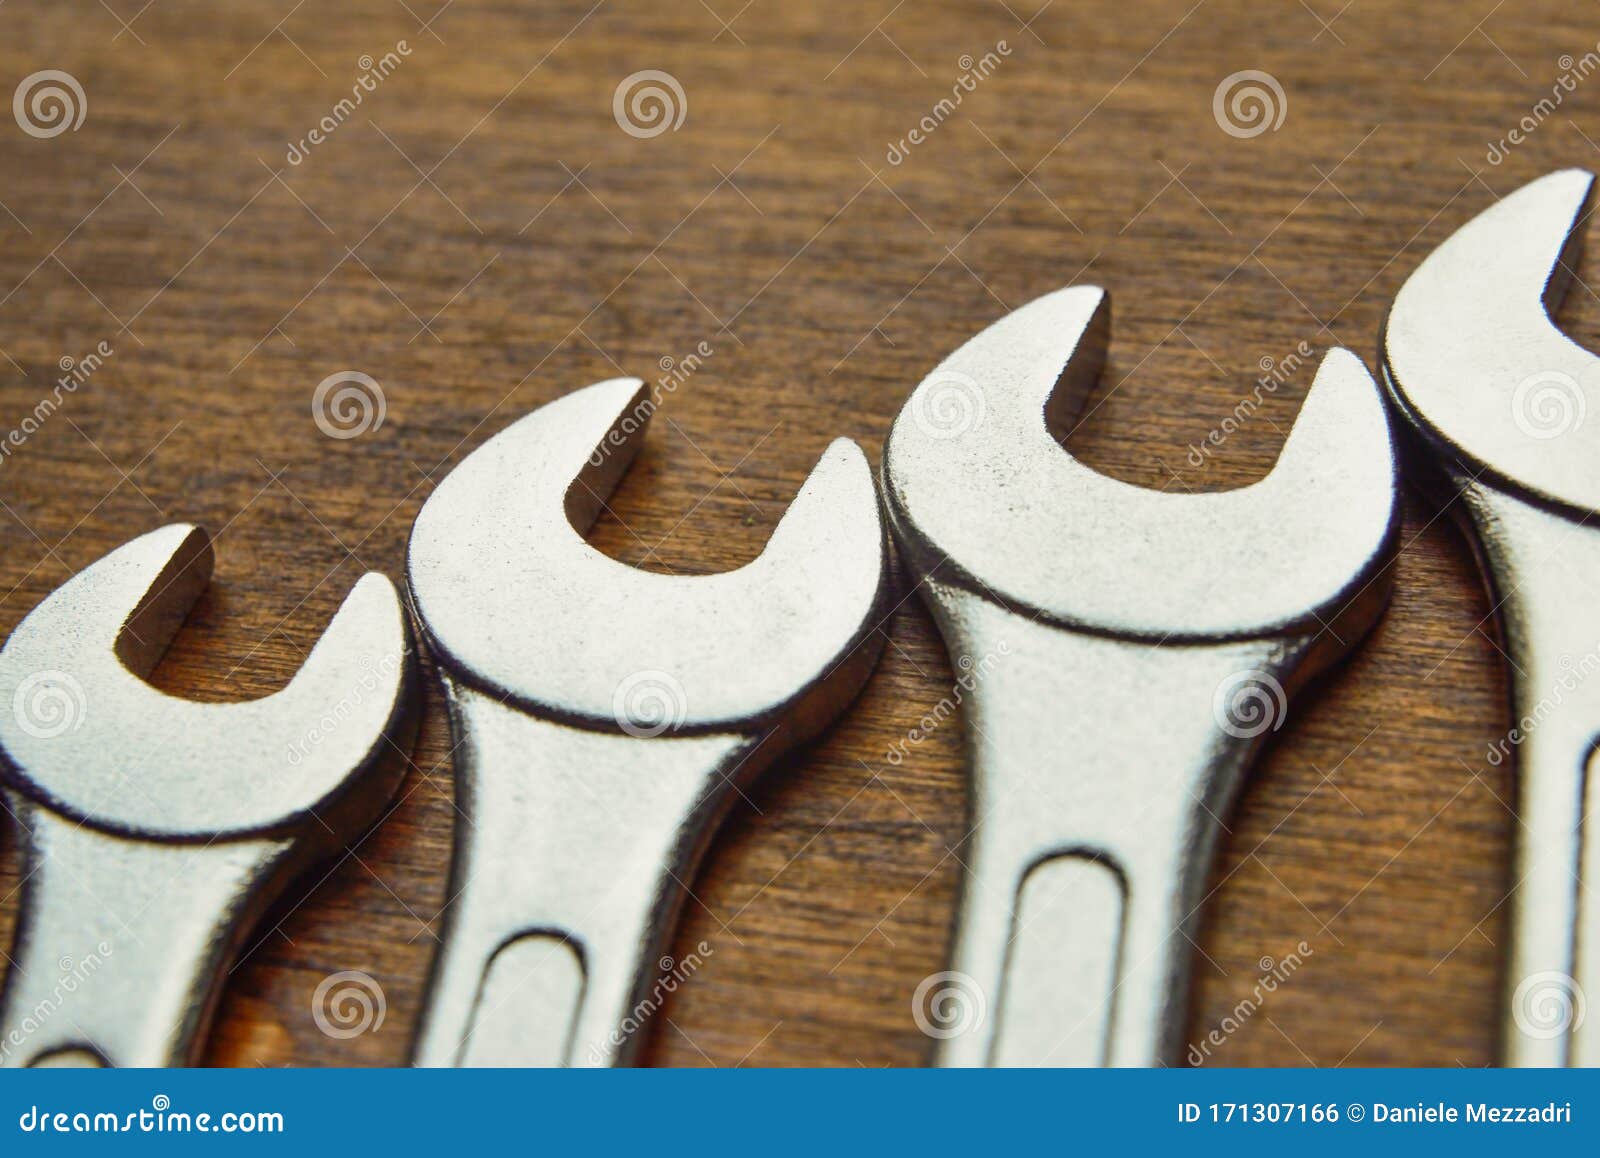 metallic wrenches on a wooden background